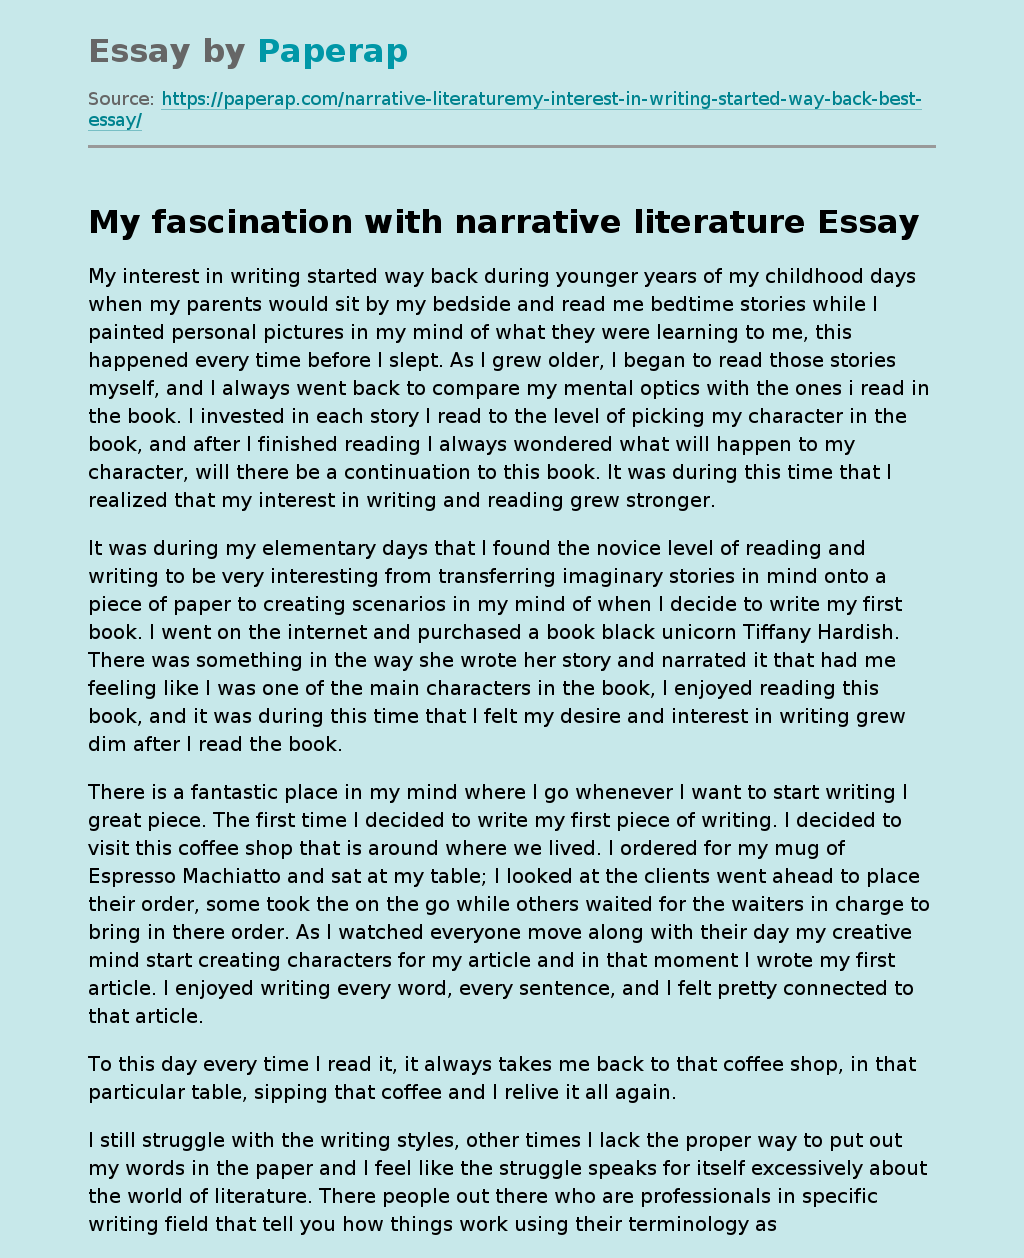 My fascination with narrative literature